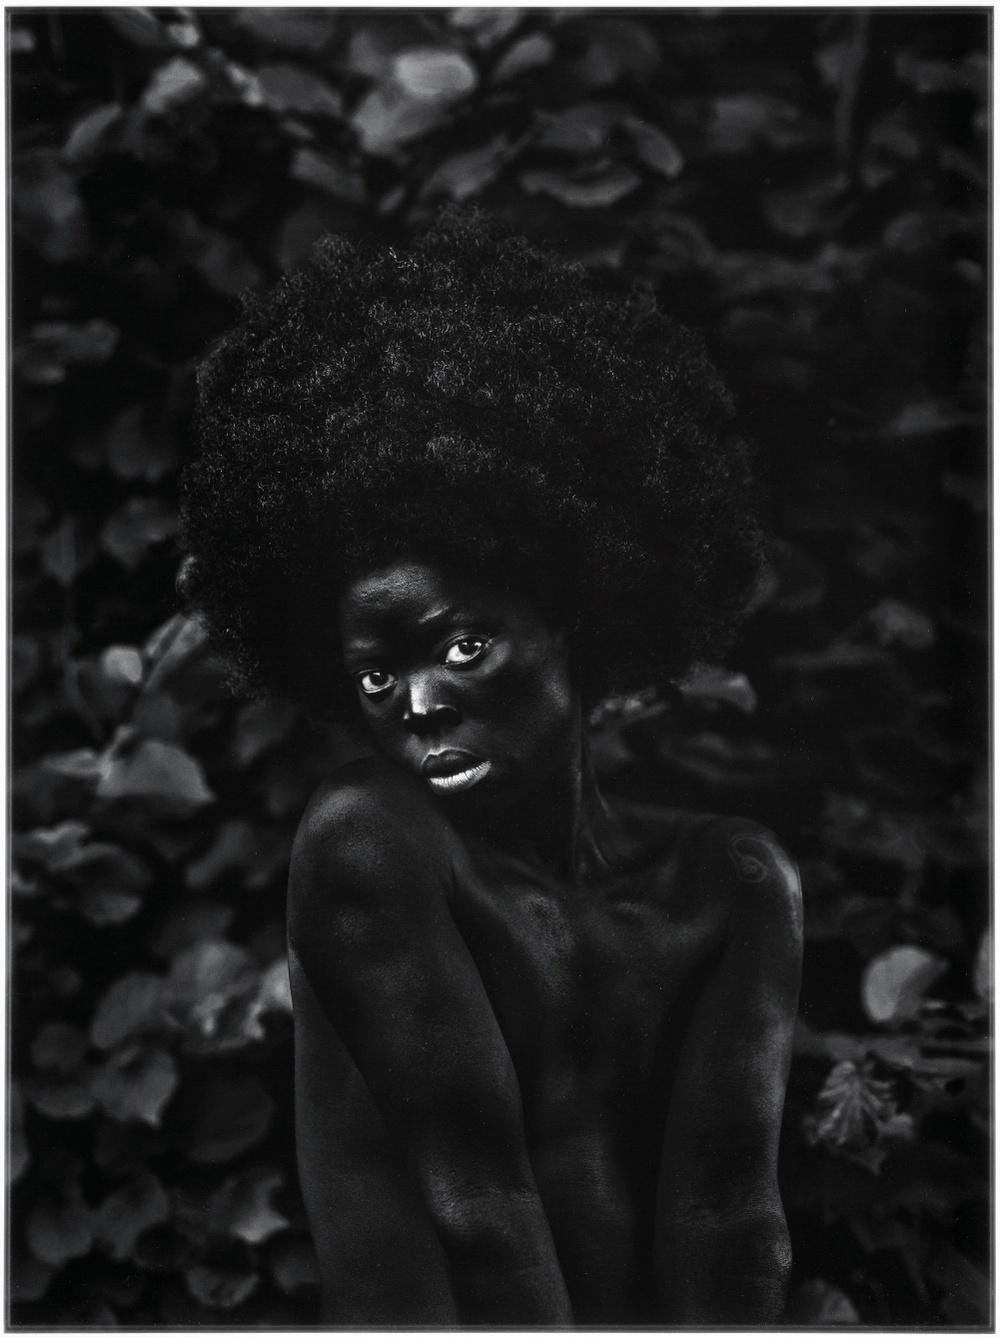 A black and white photograph of a black woman with her head turned and chin touching her shoulder, she is looking towards the camera. There are leaves in the background.